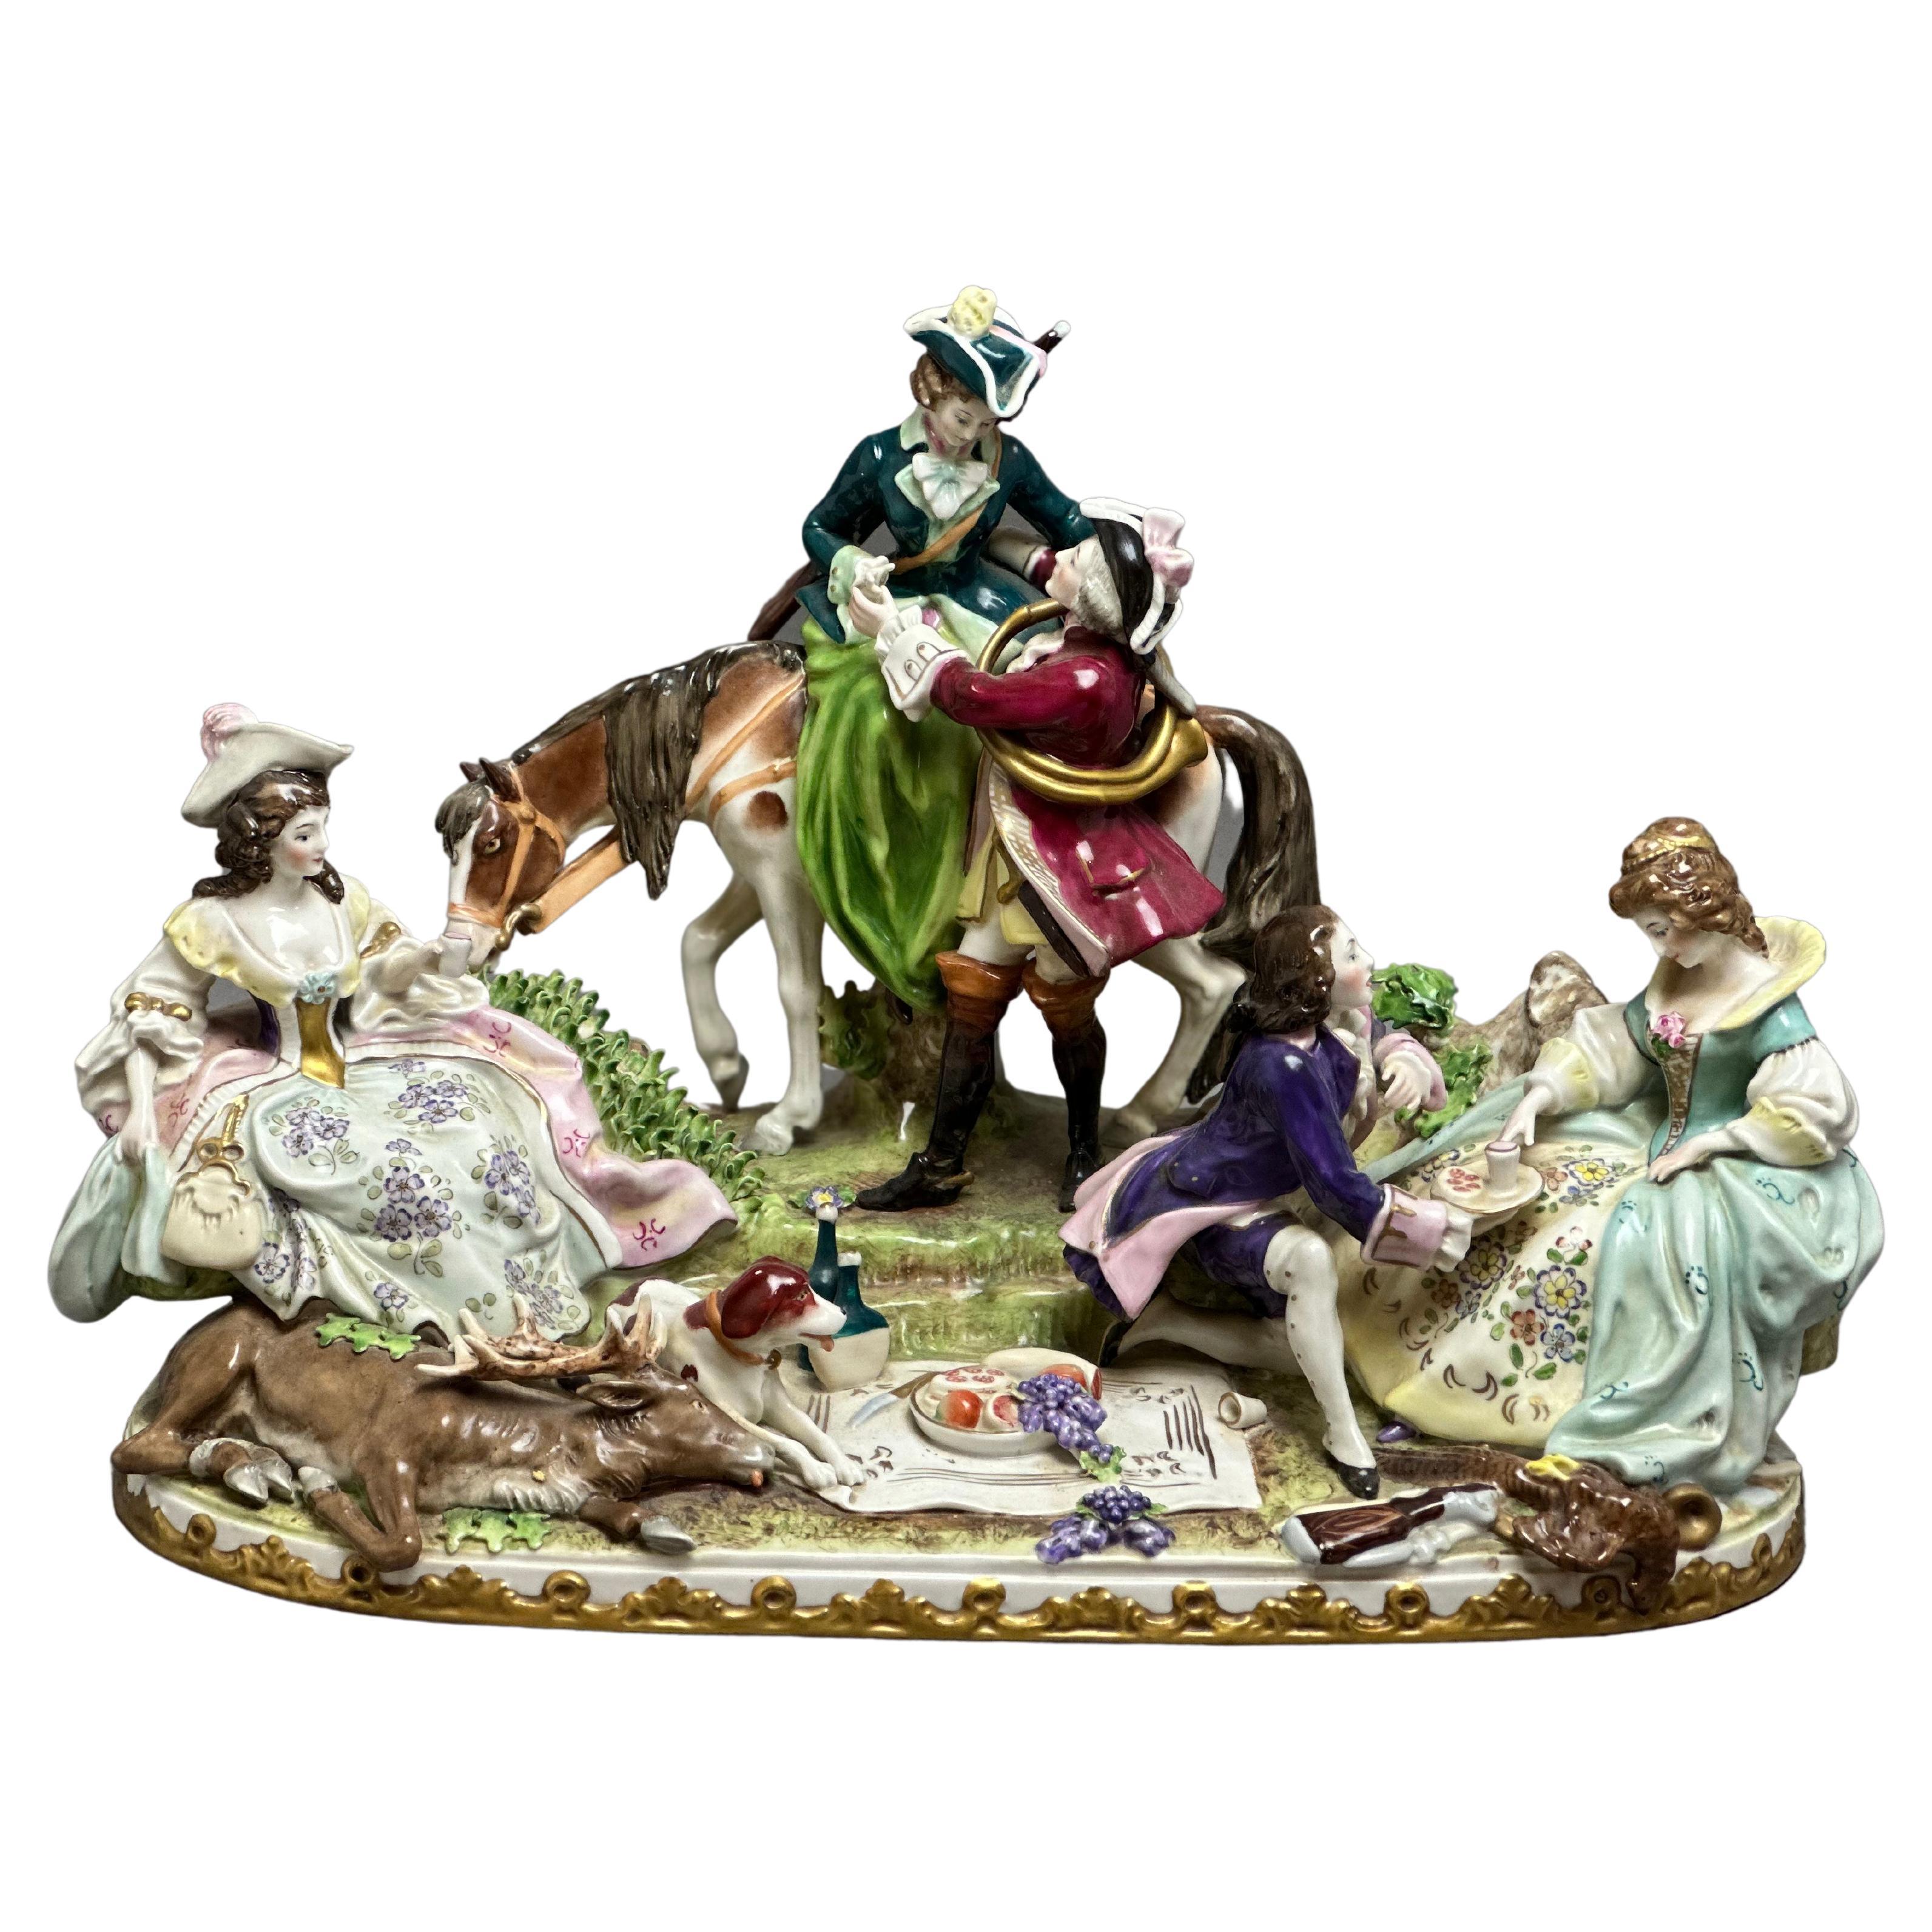 House Scheibe Alsbach Porcelain Figures 'Hunting Scene in circa 1750